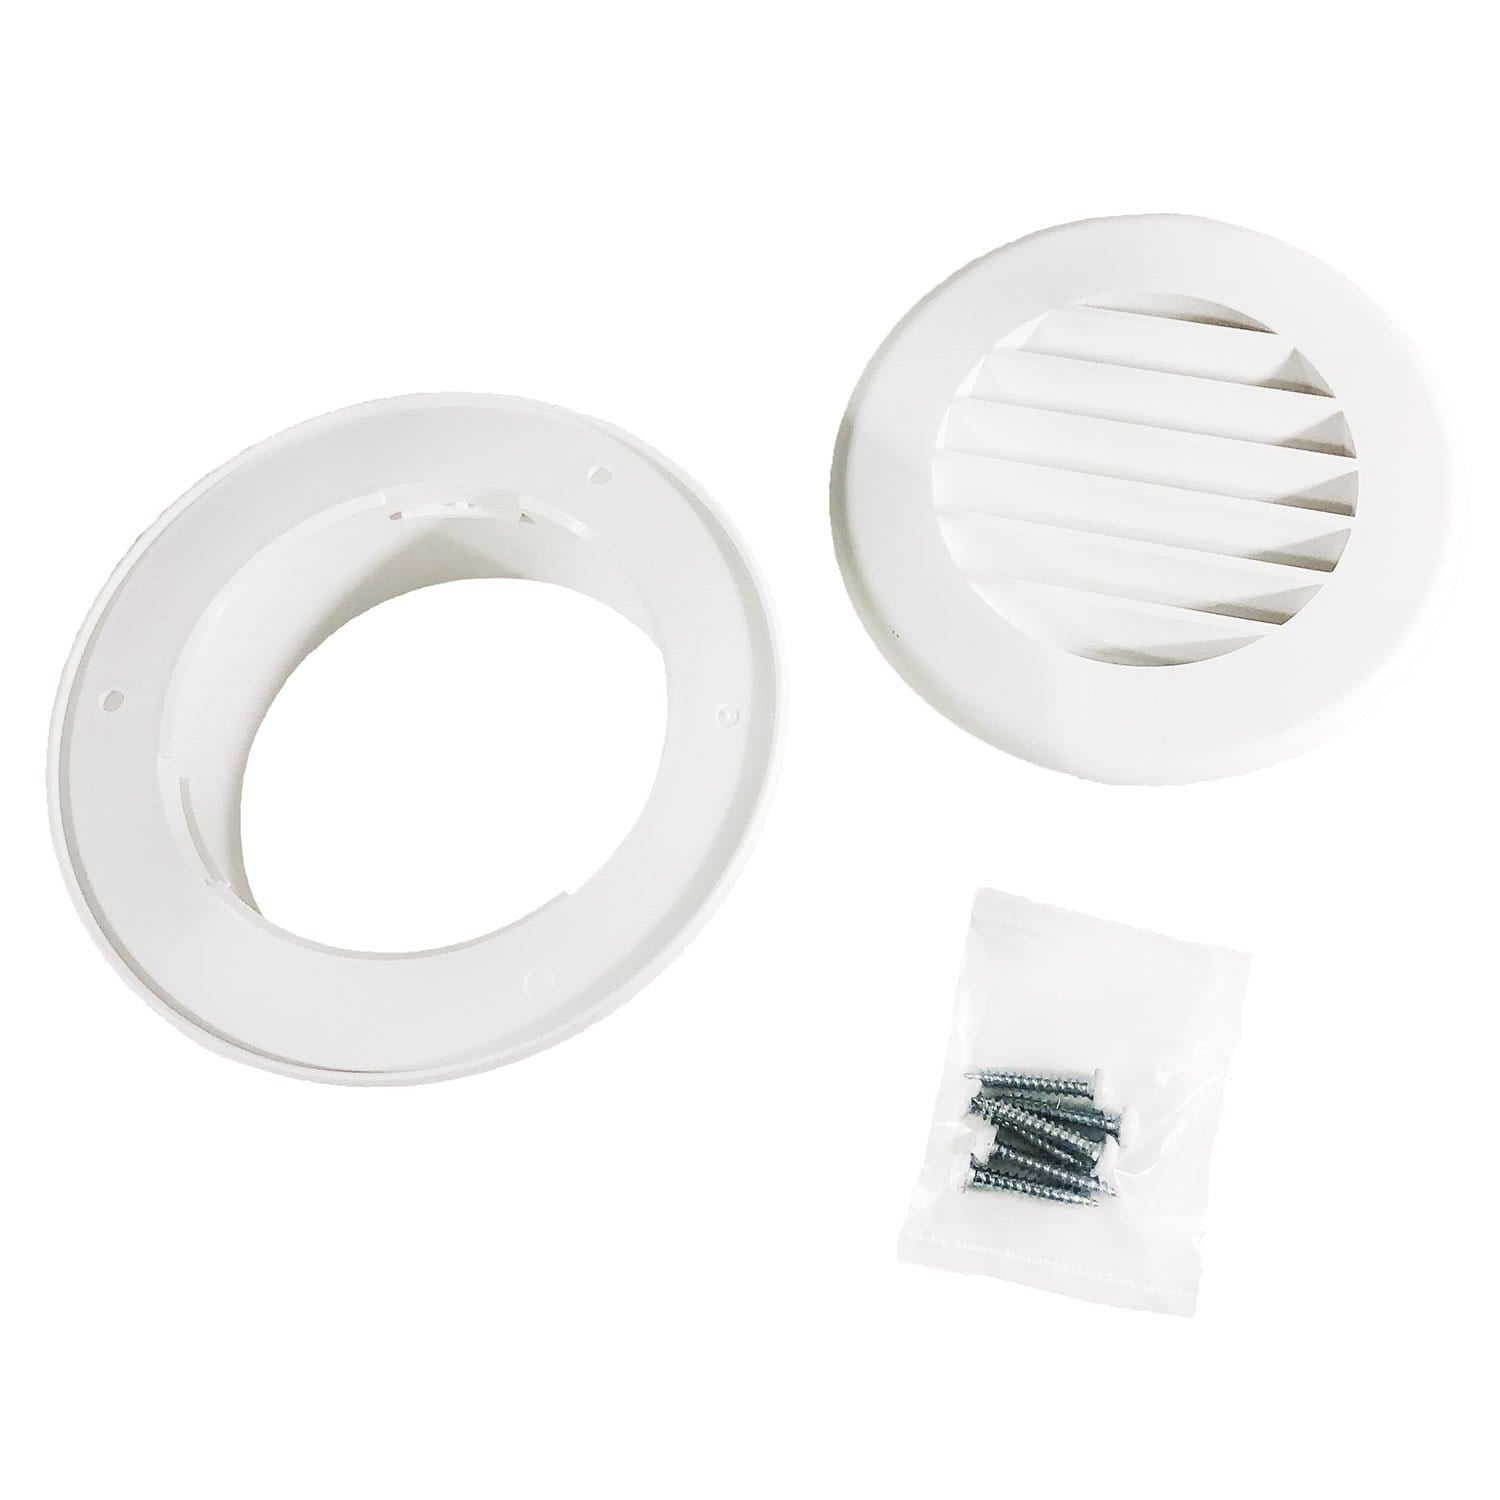 Thetford 94264 (601-015-94264) B&B Molders 4" Thermovent Ducted Heat Vent, No Damper, White